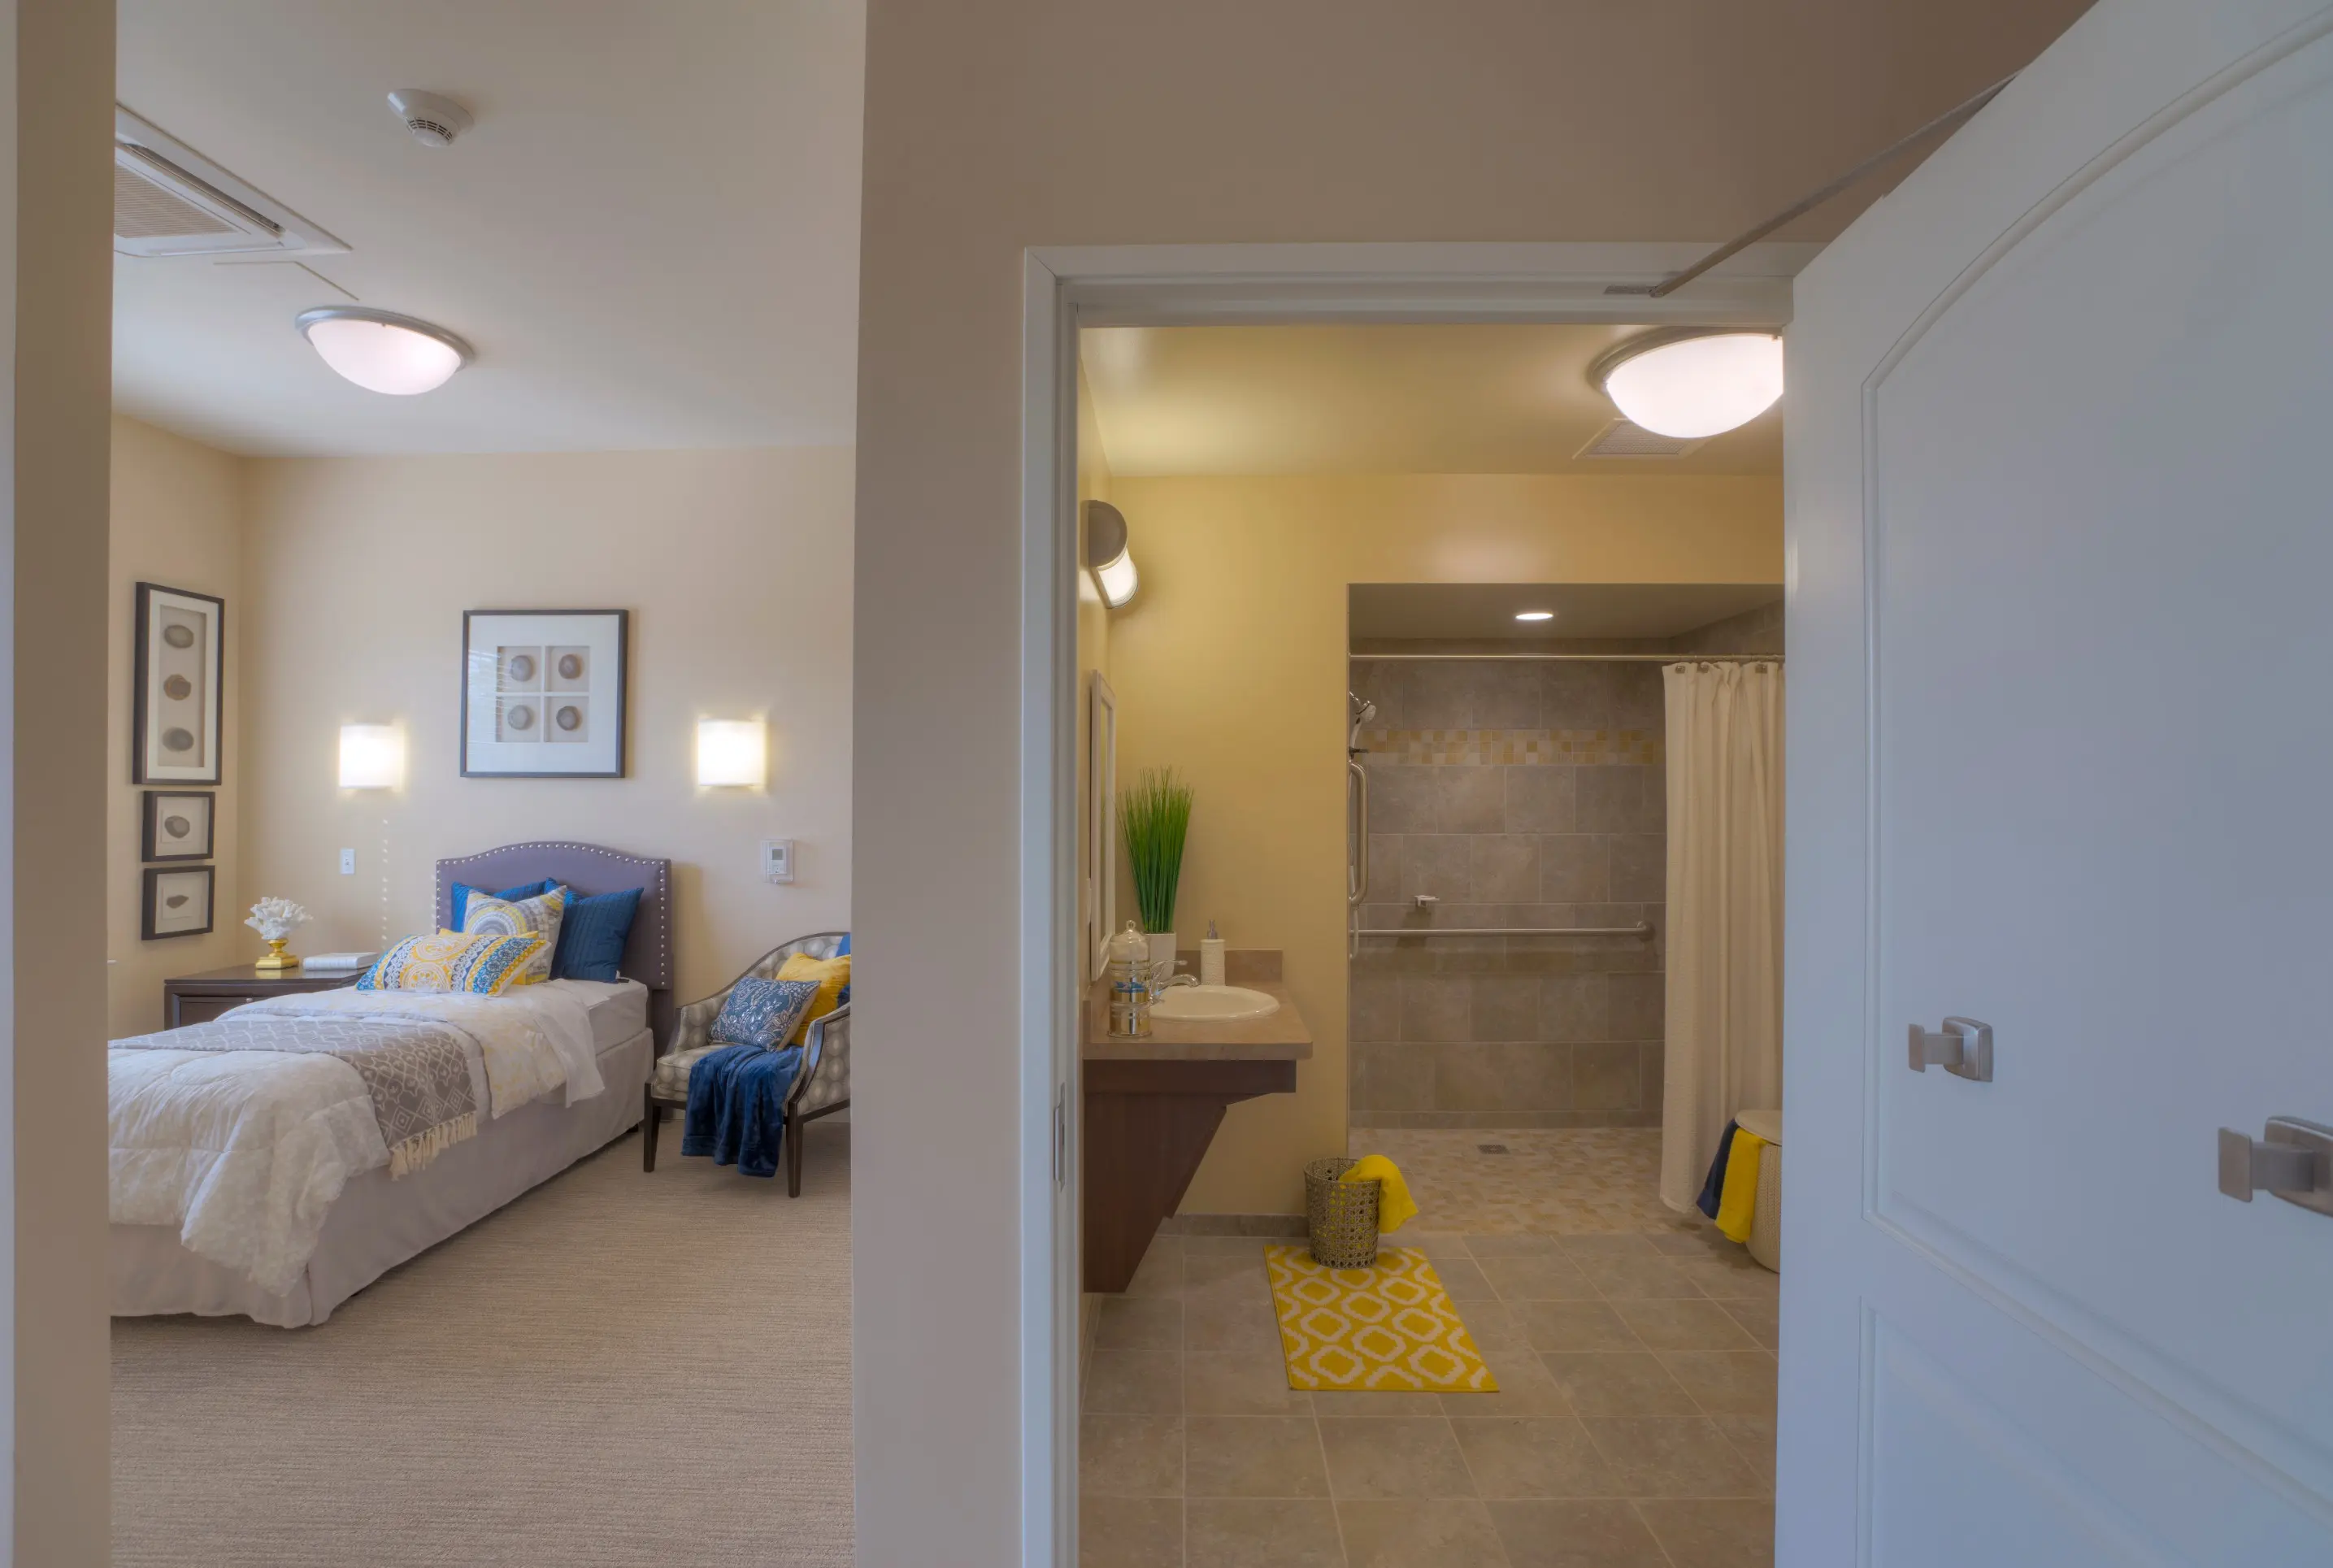 Bedroom and bathroom of a senior apartment at American House Freedom Place Roseville, a memory care community in Roseville, Michigan